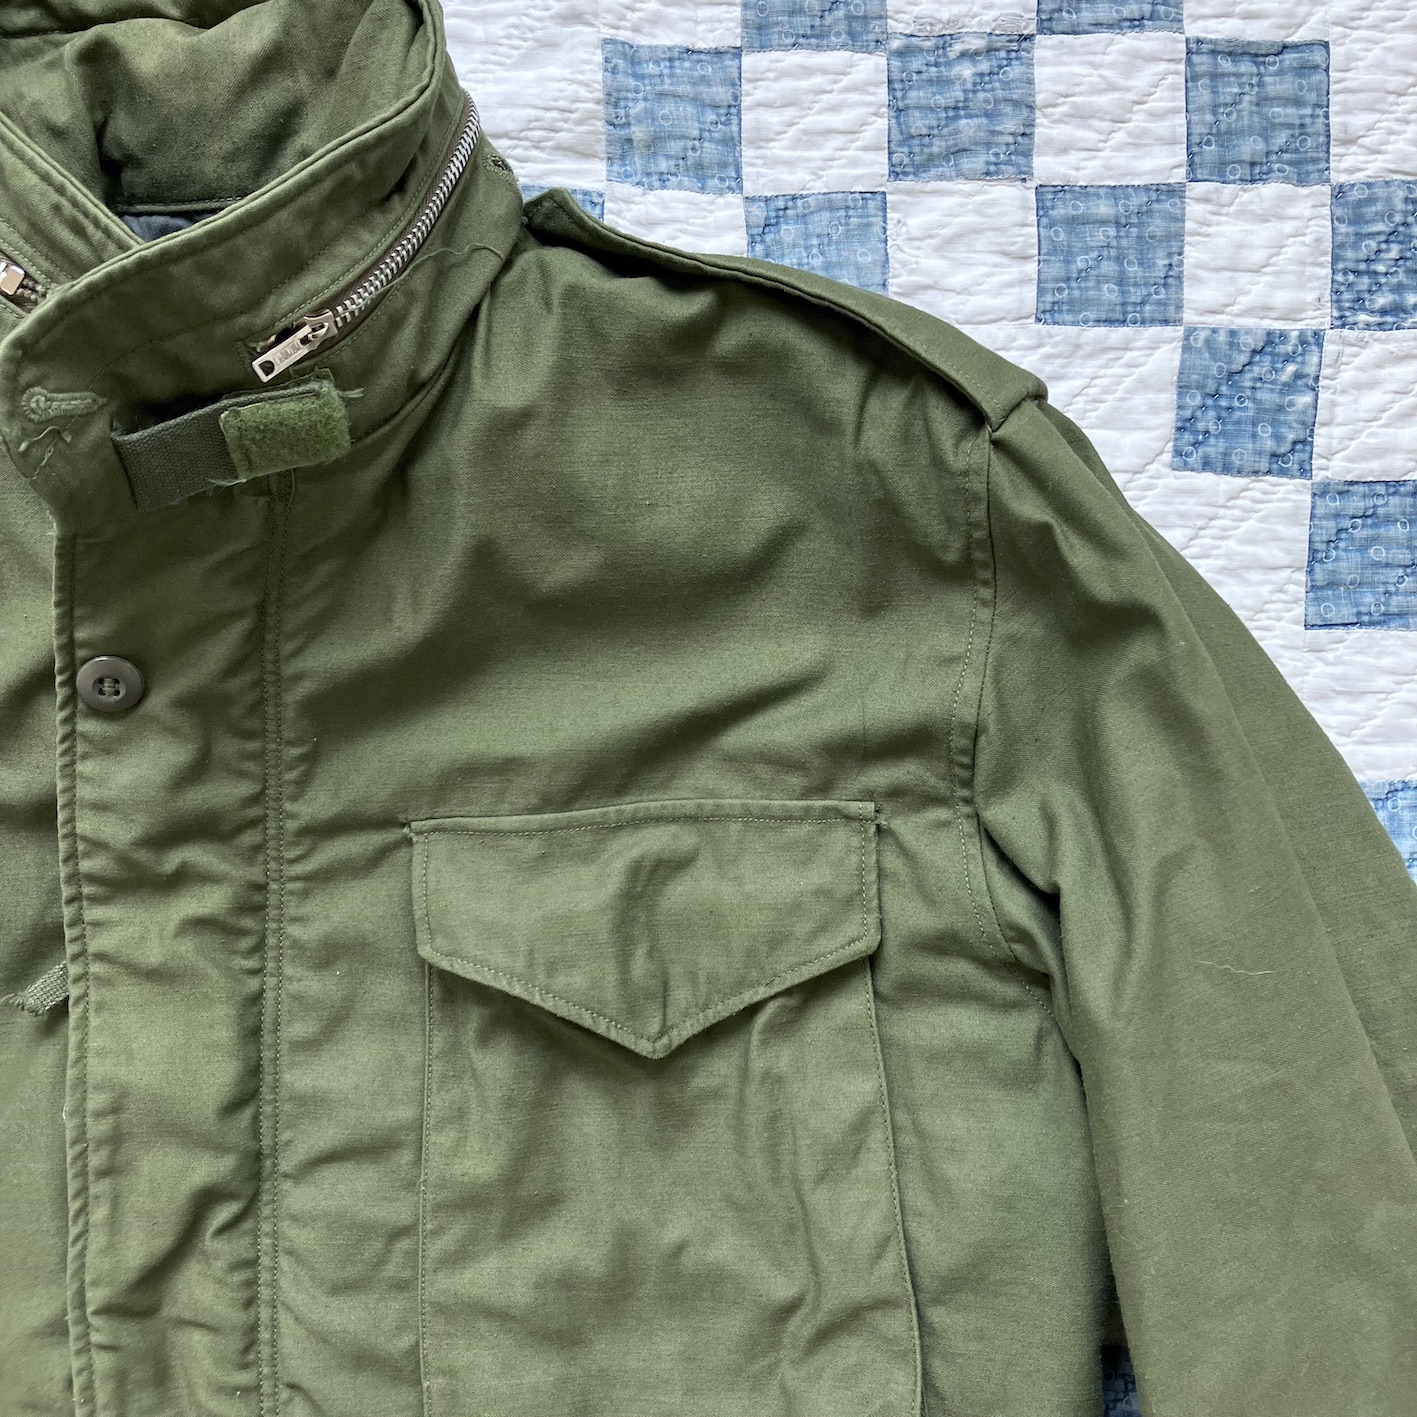 60's M-65 field jacket gray liner | Button Up Clothing